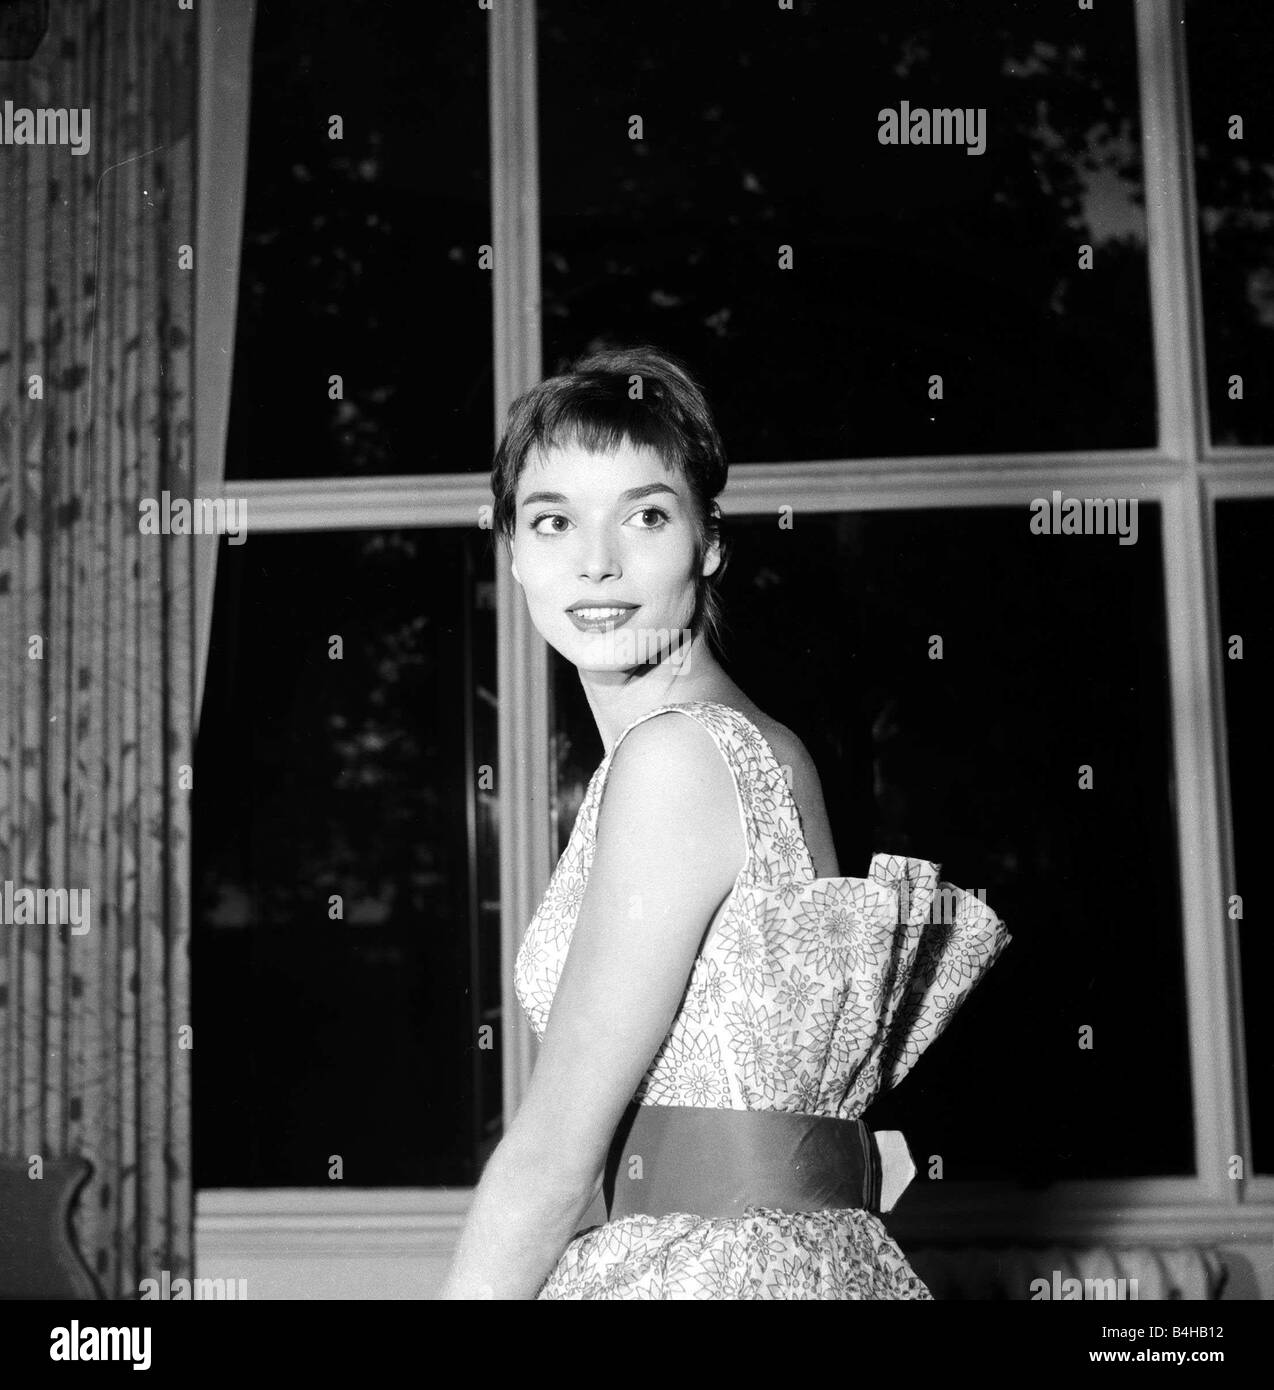 Elsa Martinelli July 1957 Italian Actress Pictured at The Savoy Hotel in London She has arrived in London to attend the premiere of her new film called Manuella Entertainment Film Actresses 1950s Actress Portrait Stock Photo